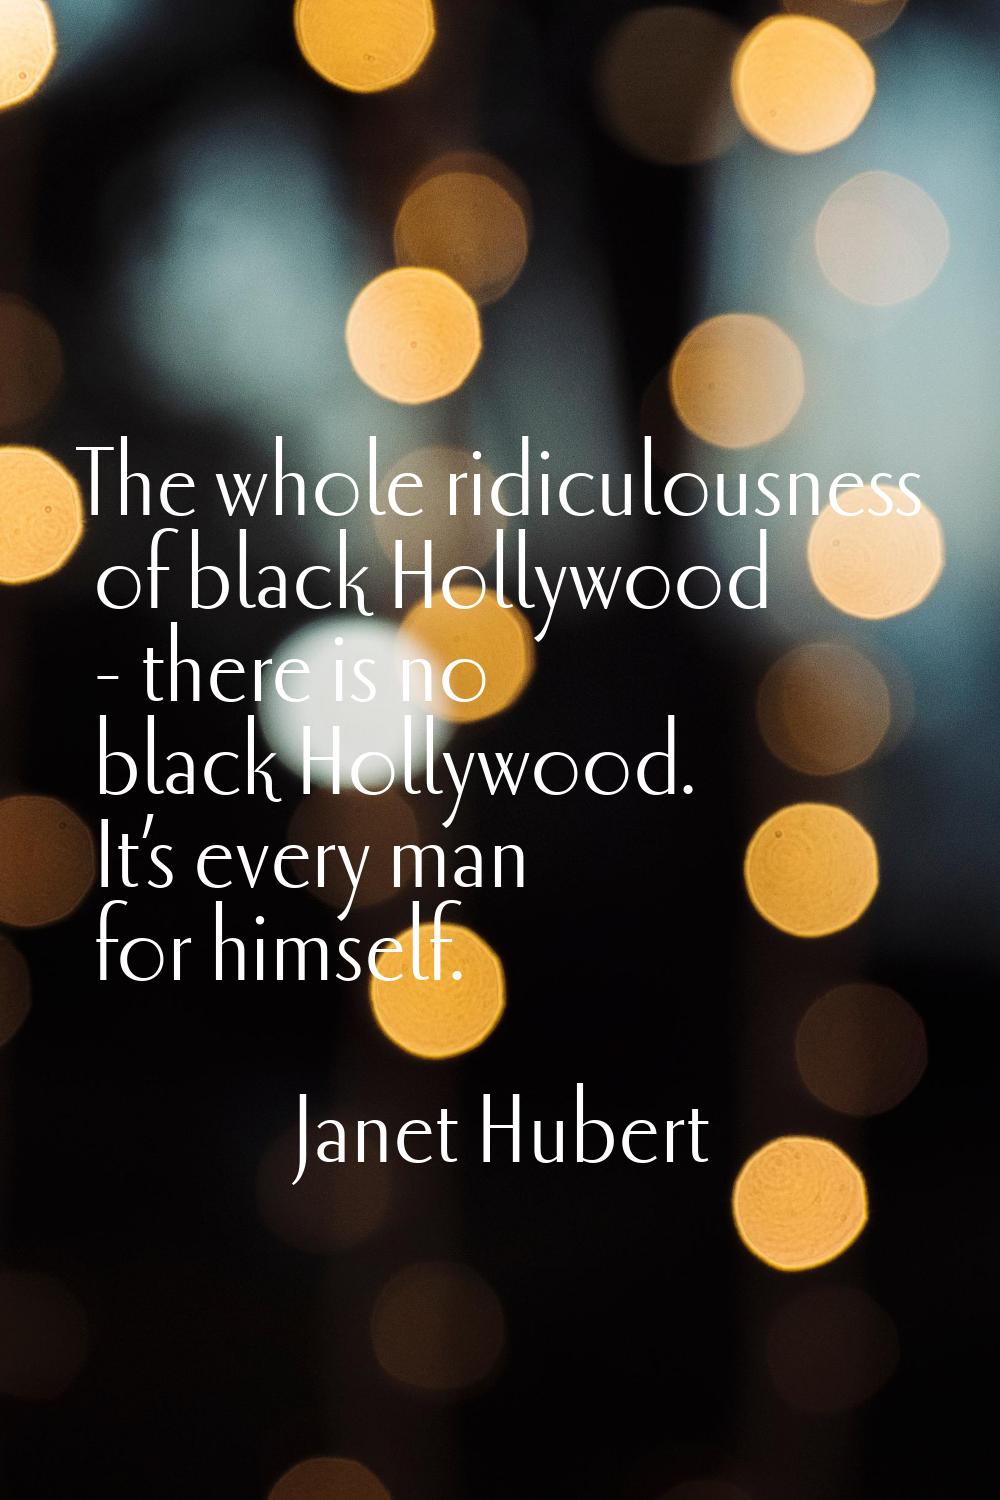 The whole ridiculousness of black Hollywood - there is no black Hollywood. It’s every man for himse